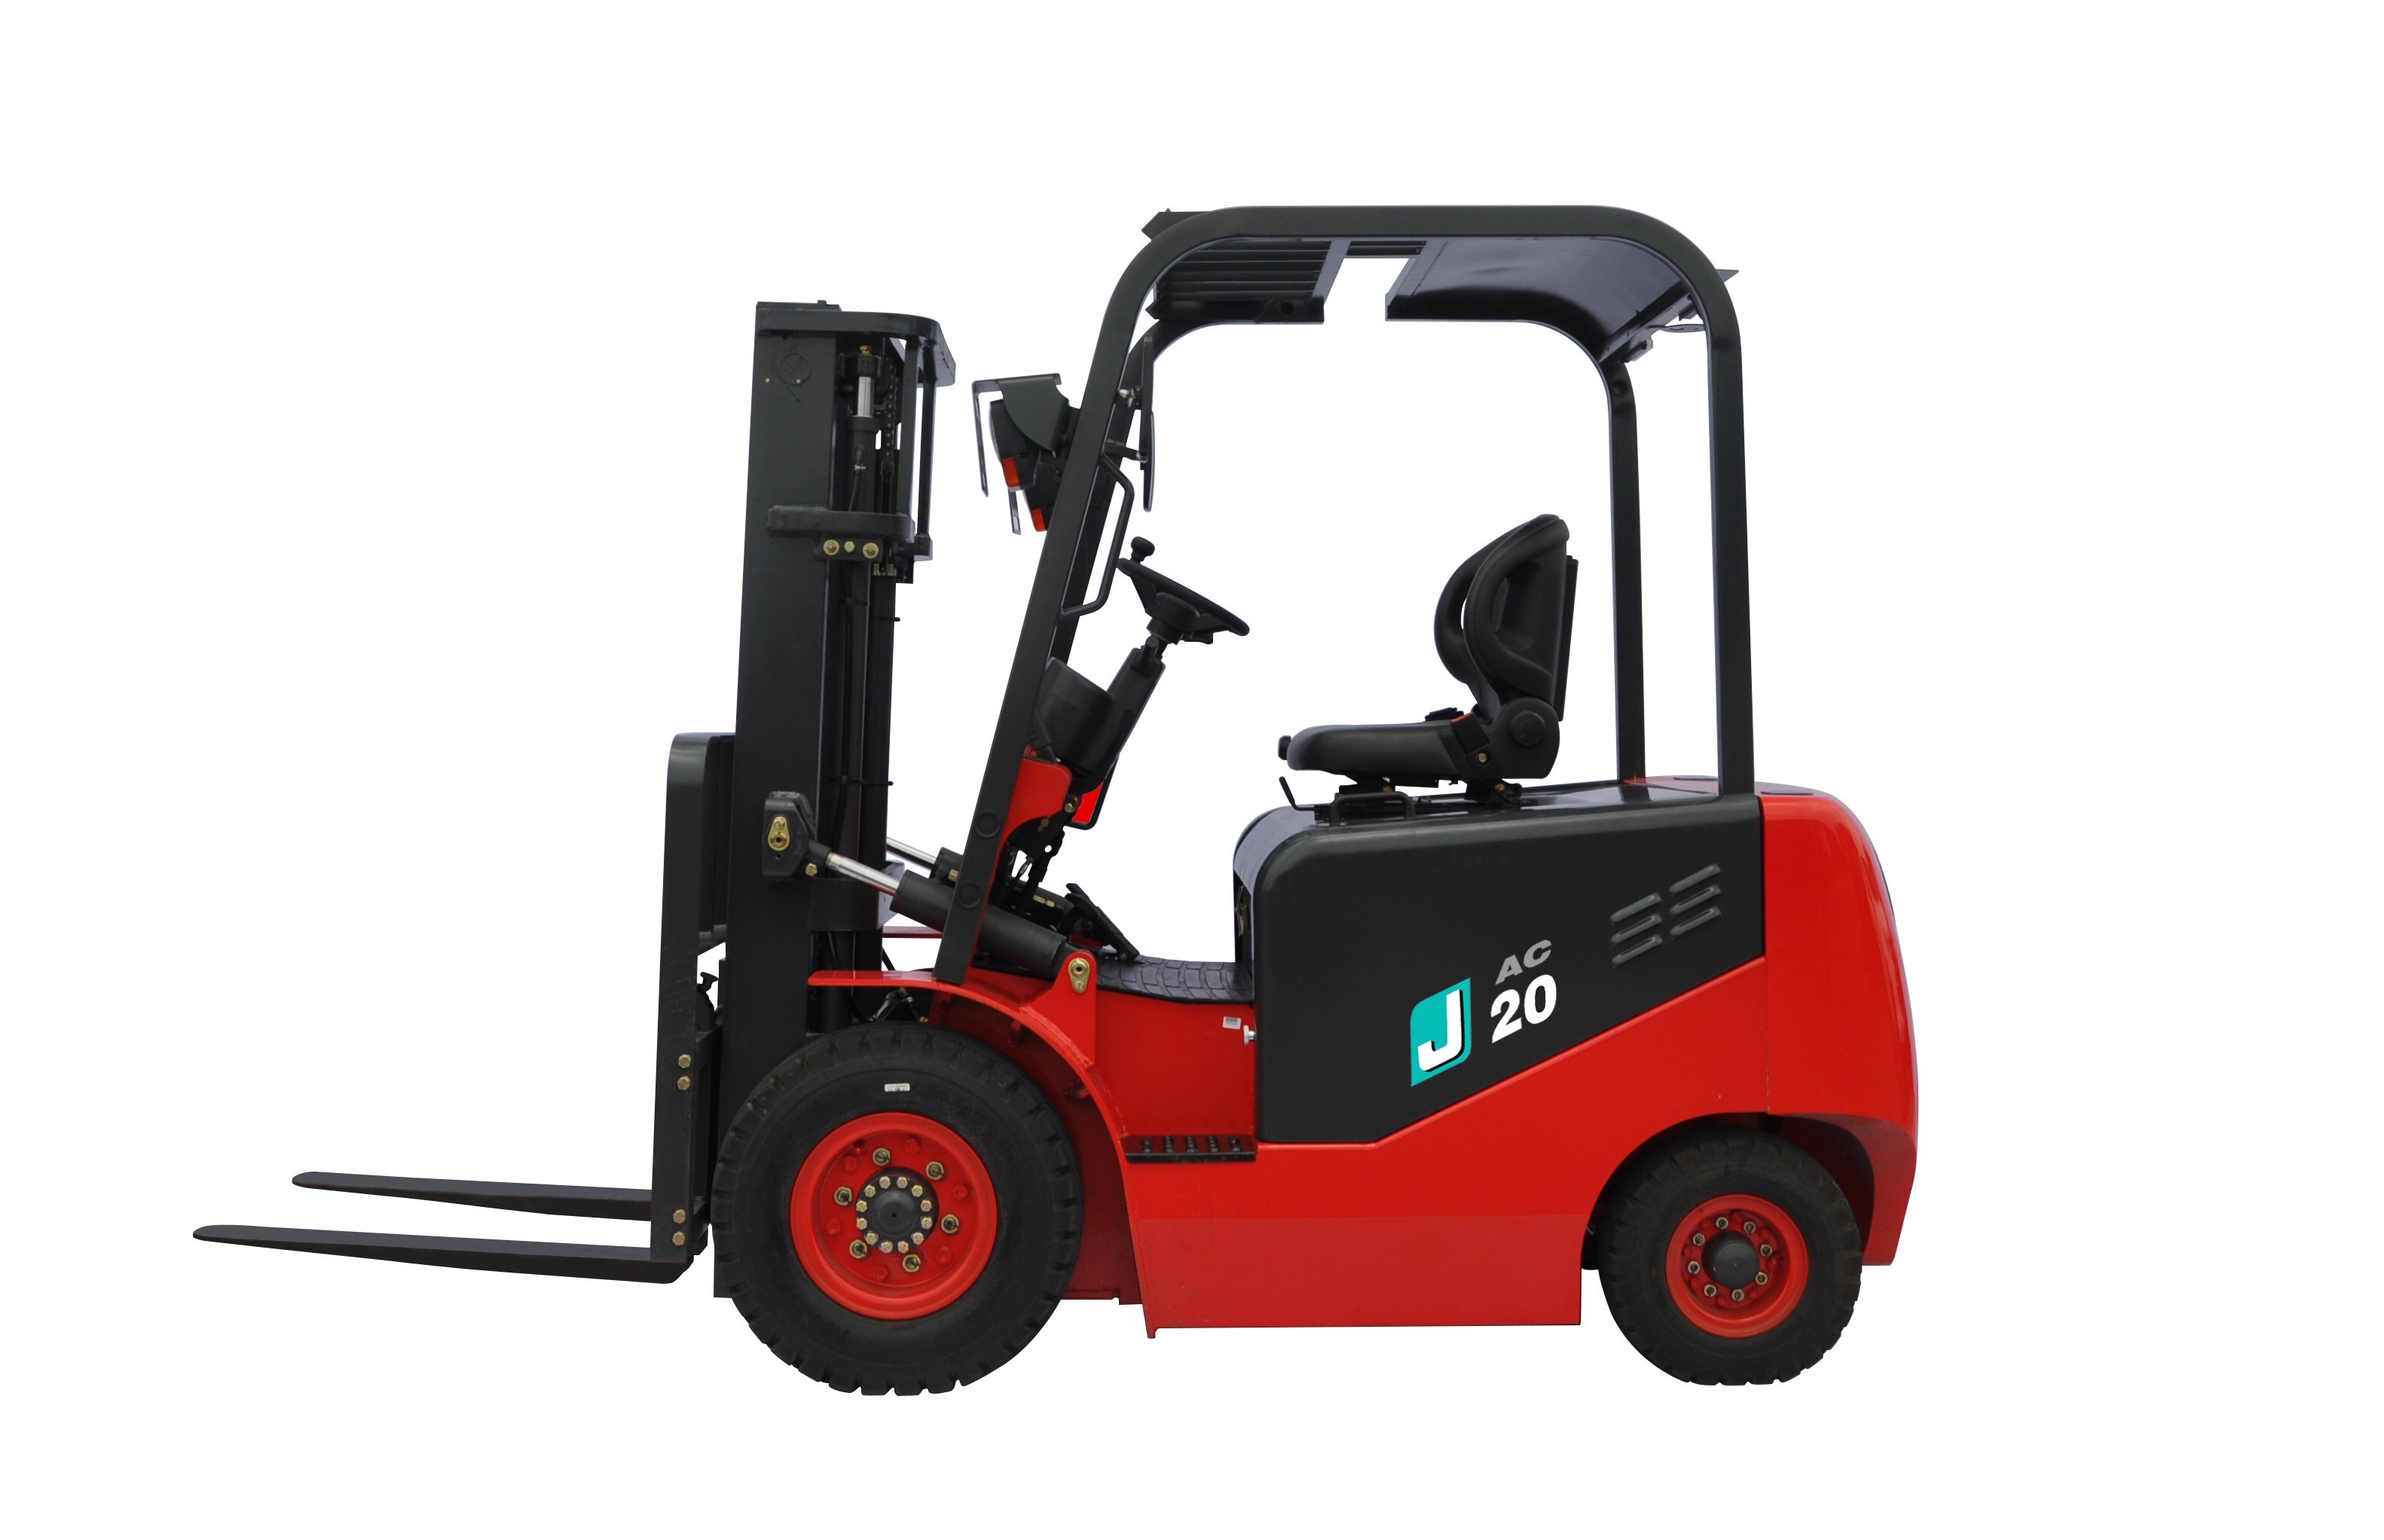  2 Ton Lifting Capacity Electric Battery Forklift Truck With Comfortable Seating Manufactures